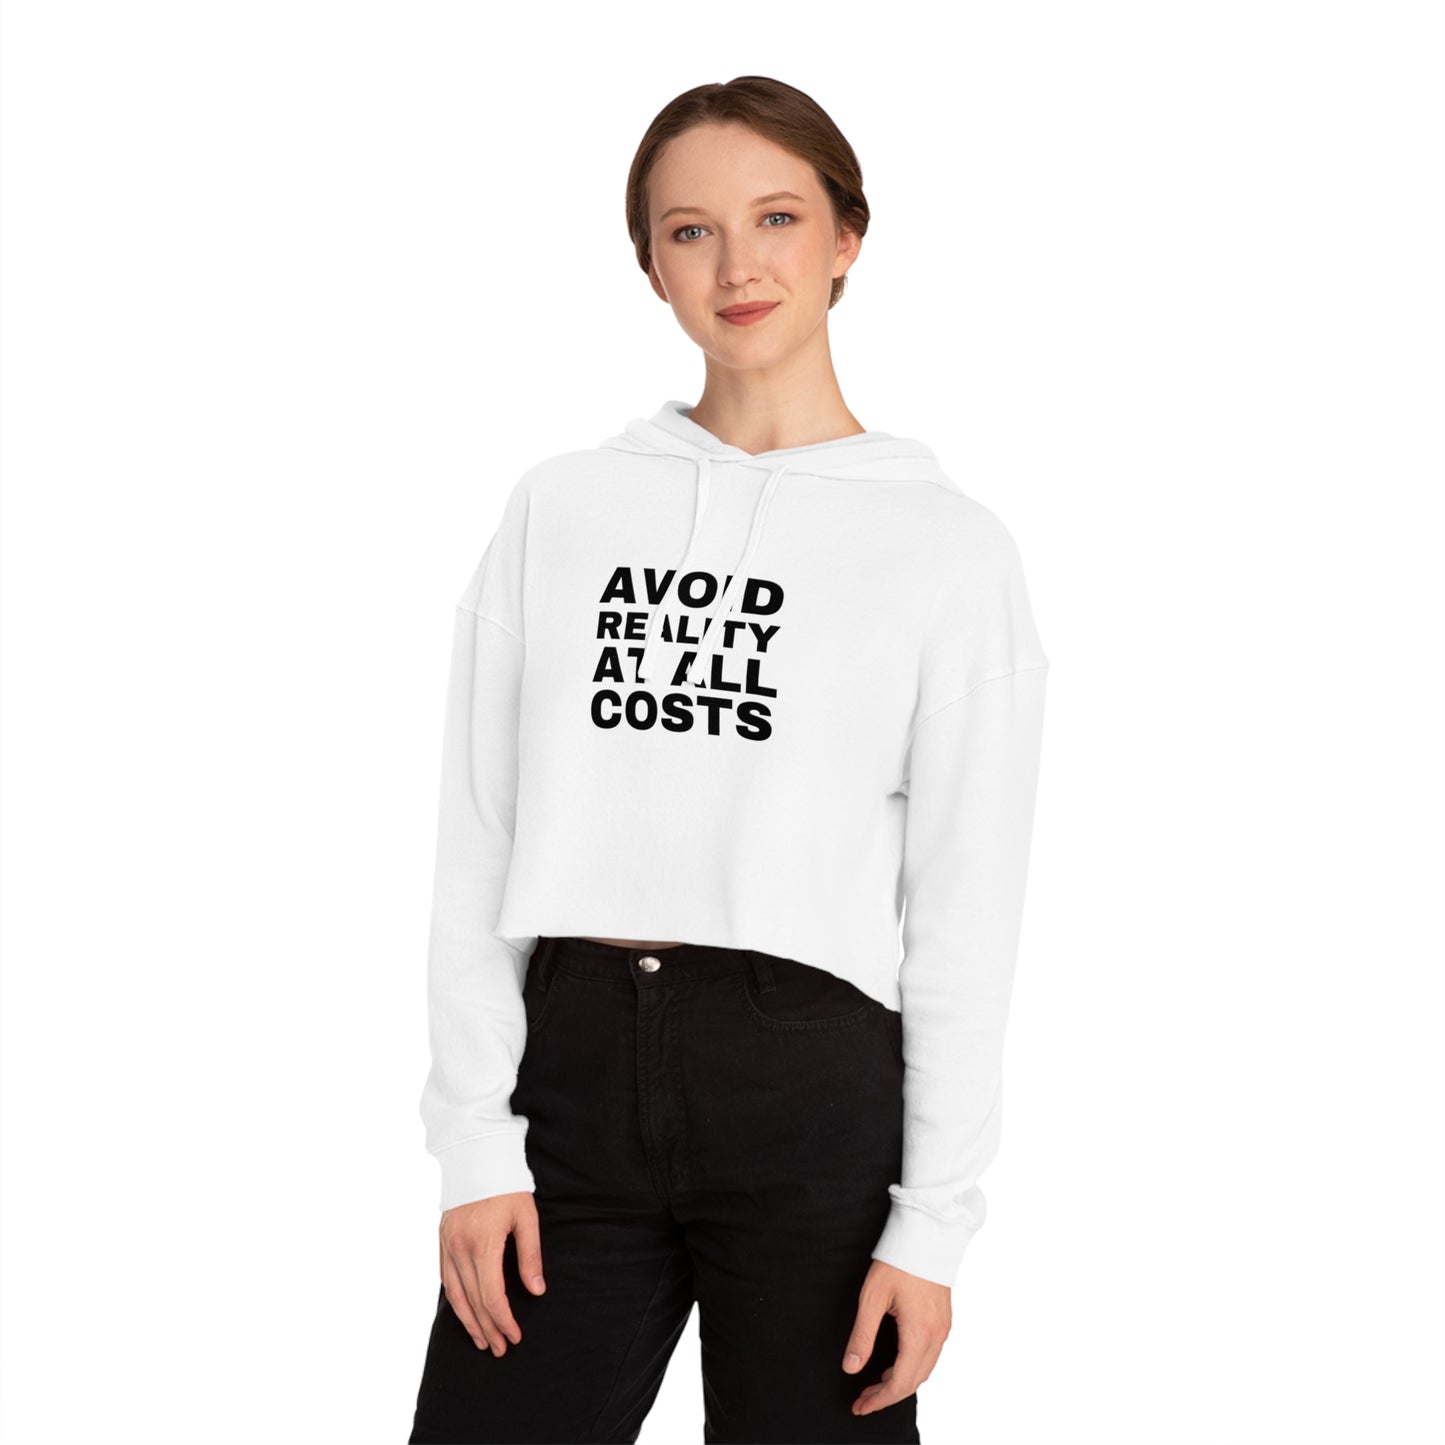 Avoid Reality at All Costs Women’s Cropped Hooded Sweatshirt